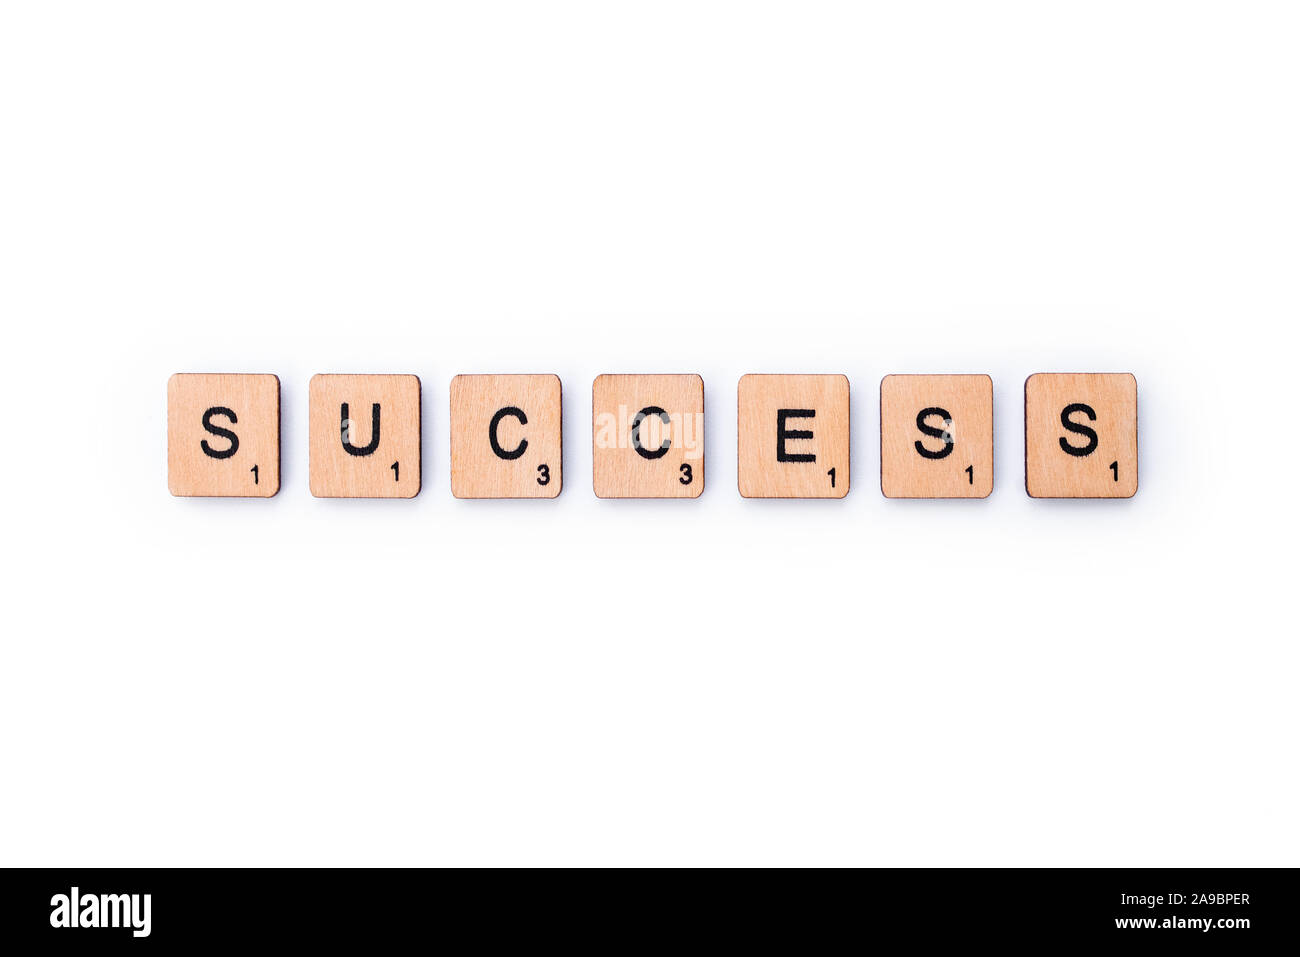 London, UK - February 13th 2019: The word SUCCESS, spelt with wooden letter tiles over a white background. Stock Photo